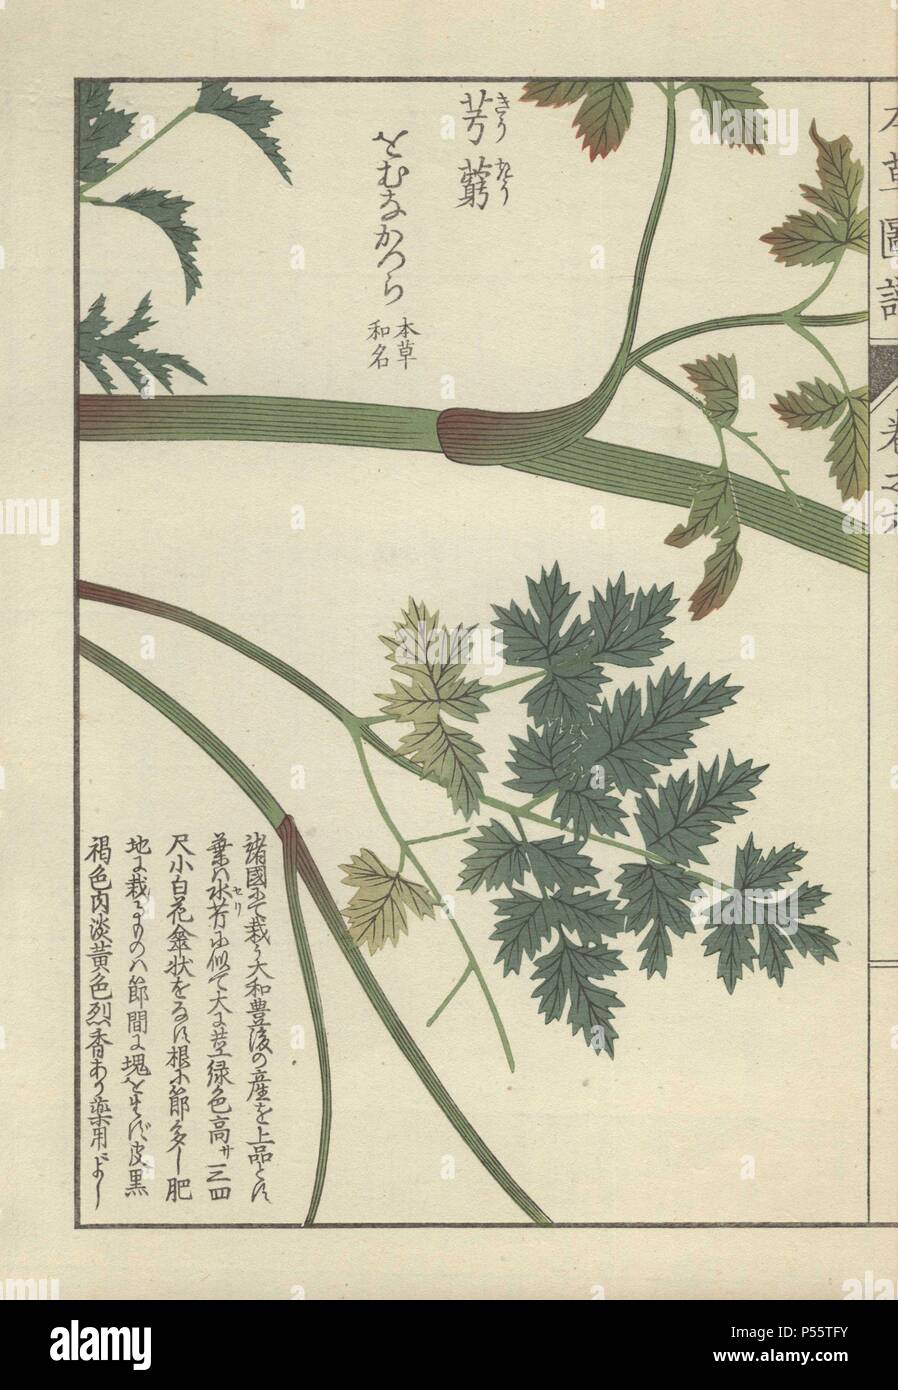 Stem and pale and dark green leaf fronds of the snowparsley plant. Cnidium officinale. Senkyou.. Colour-printed woodblock engraving by Kan'en Iwasaki from 'Honzo Zufu,' an Illustrated Guide to Medicinal Plants, 1884. Iwasaki (1786-1842) was a Japanese botanist, entomologist and zoologist. He was one of the first Japanese botanists to incorporate western knowledge into his studies. Stock Photo